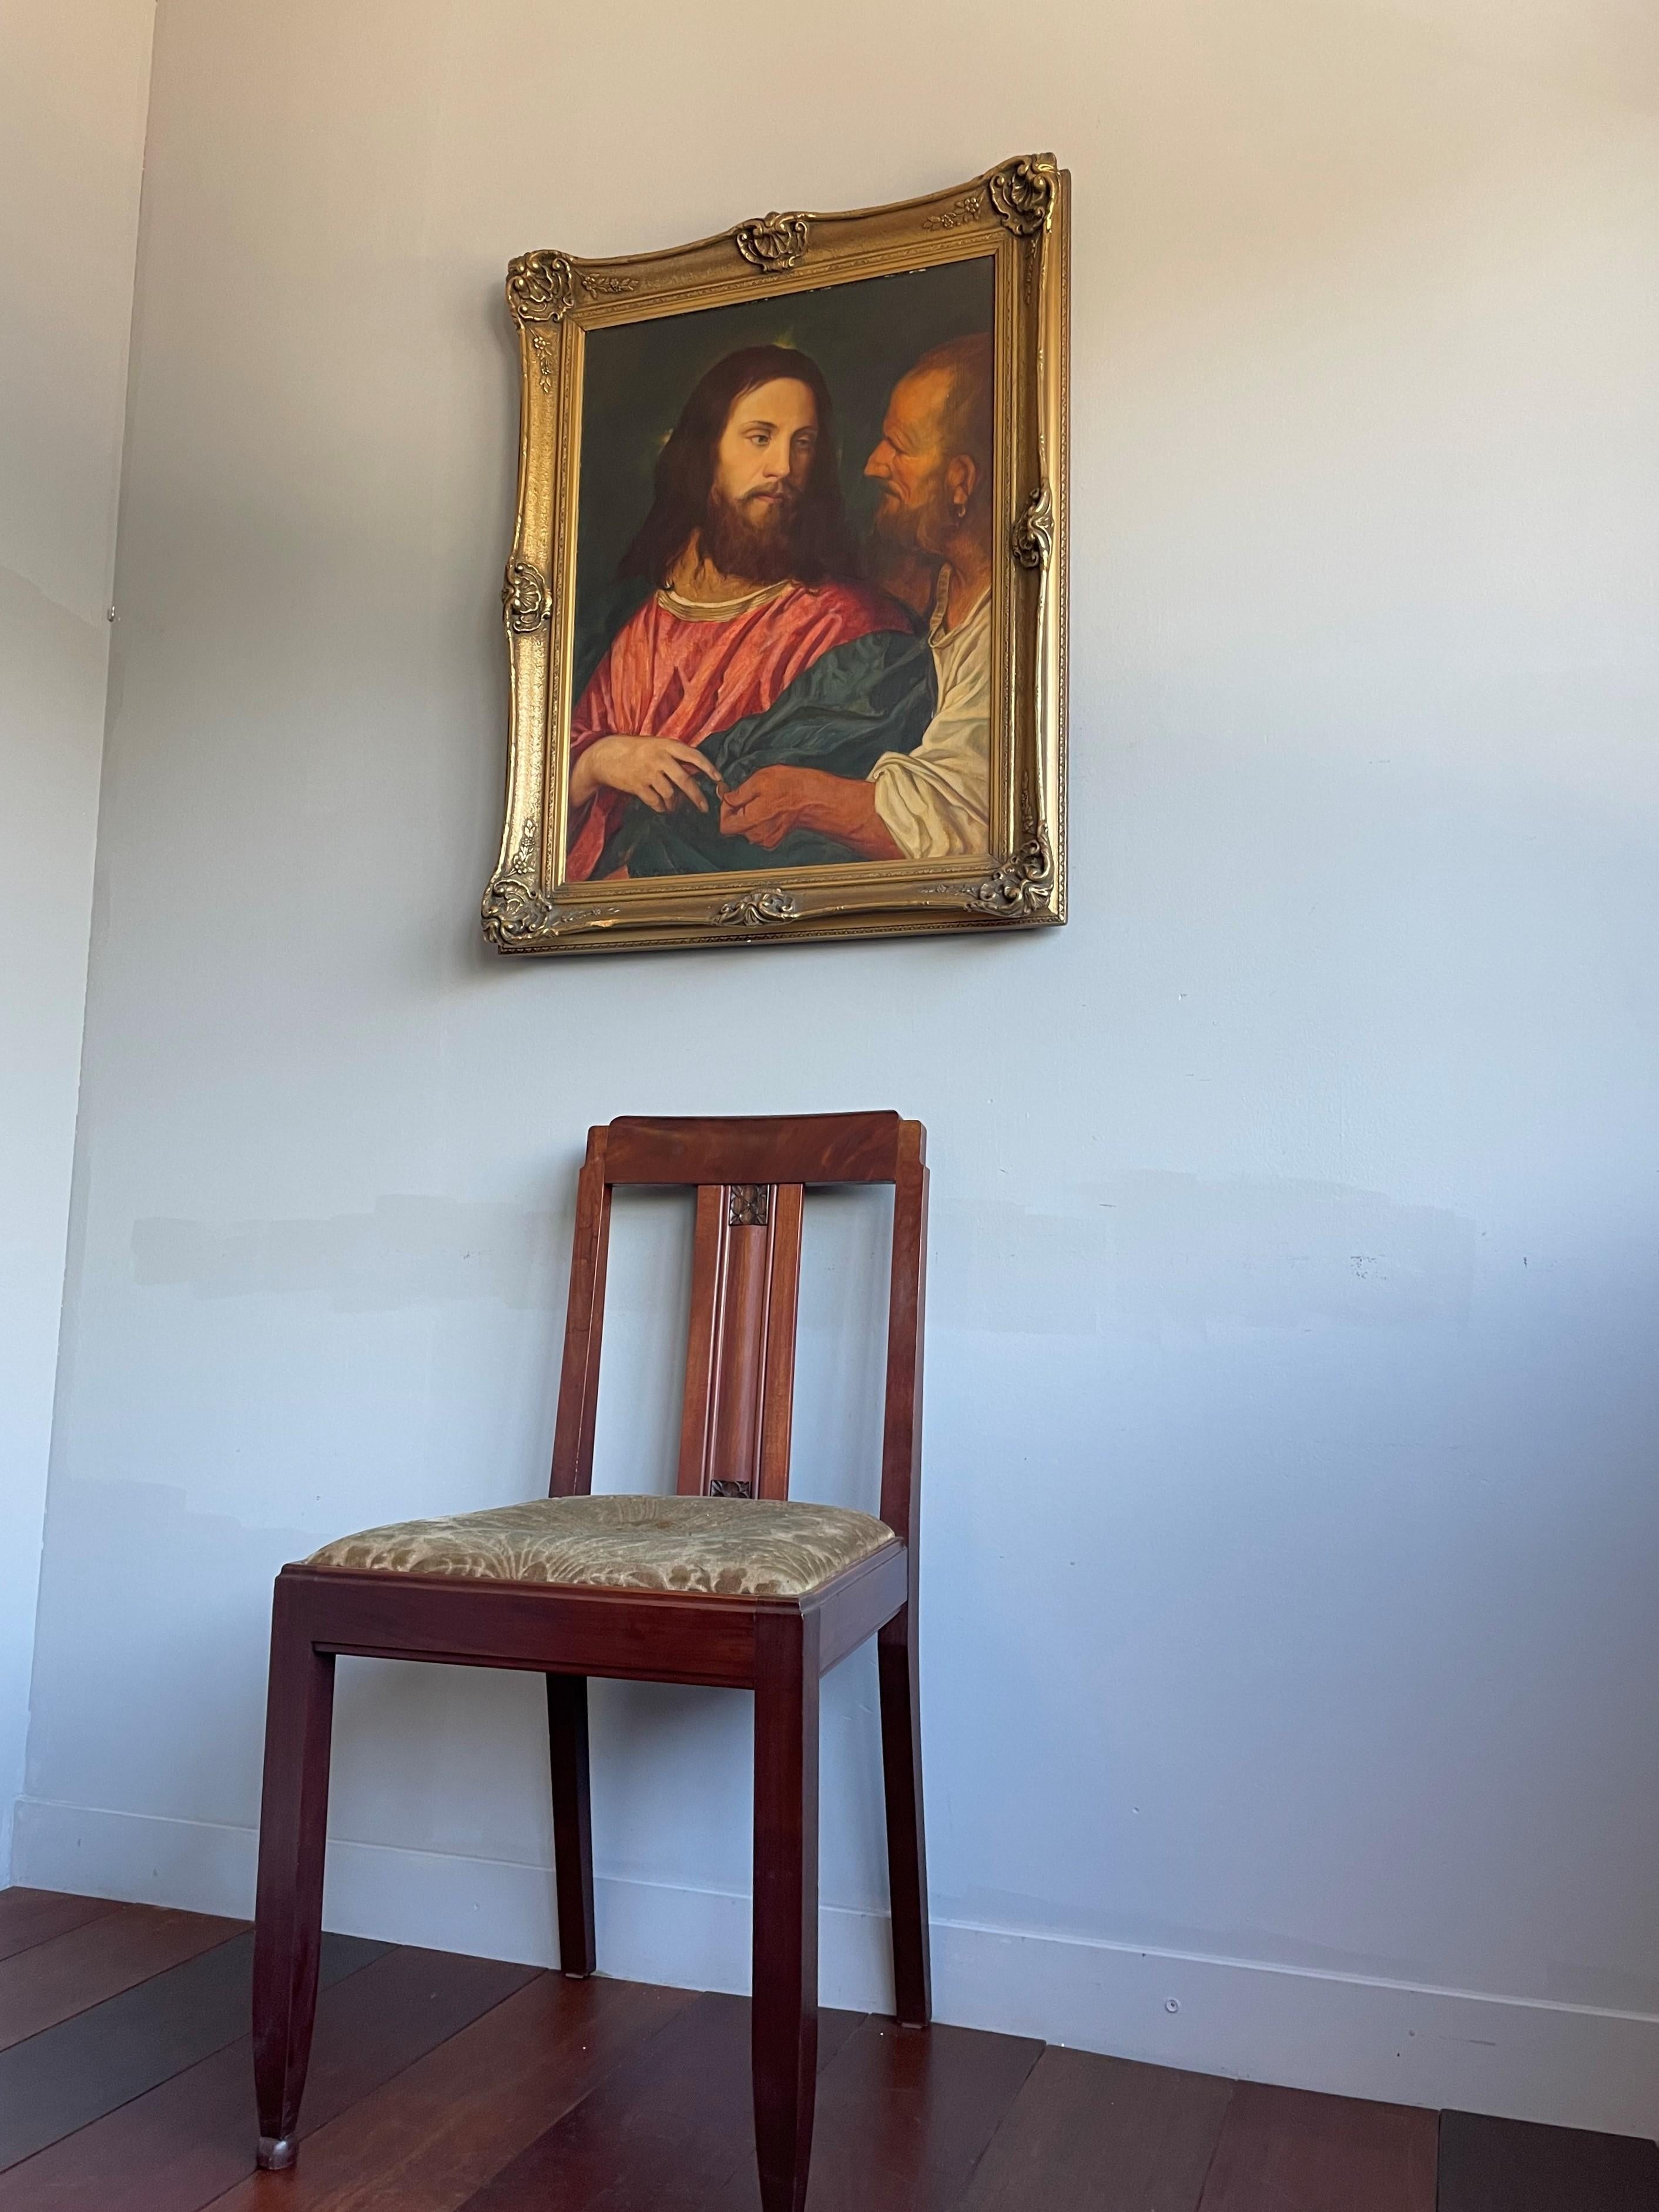 Unique and signed work of religious art, presented in the original antique frame.

Two years ago we purchased the largest part of a Christian art collection and this unique painting was one of the few in that collection. This unique and 'silently